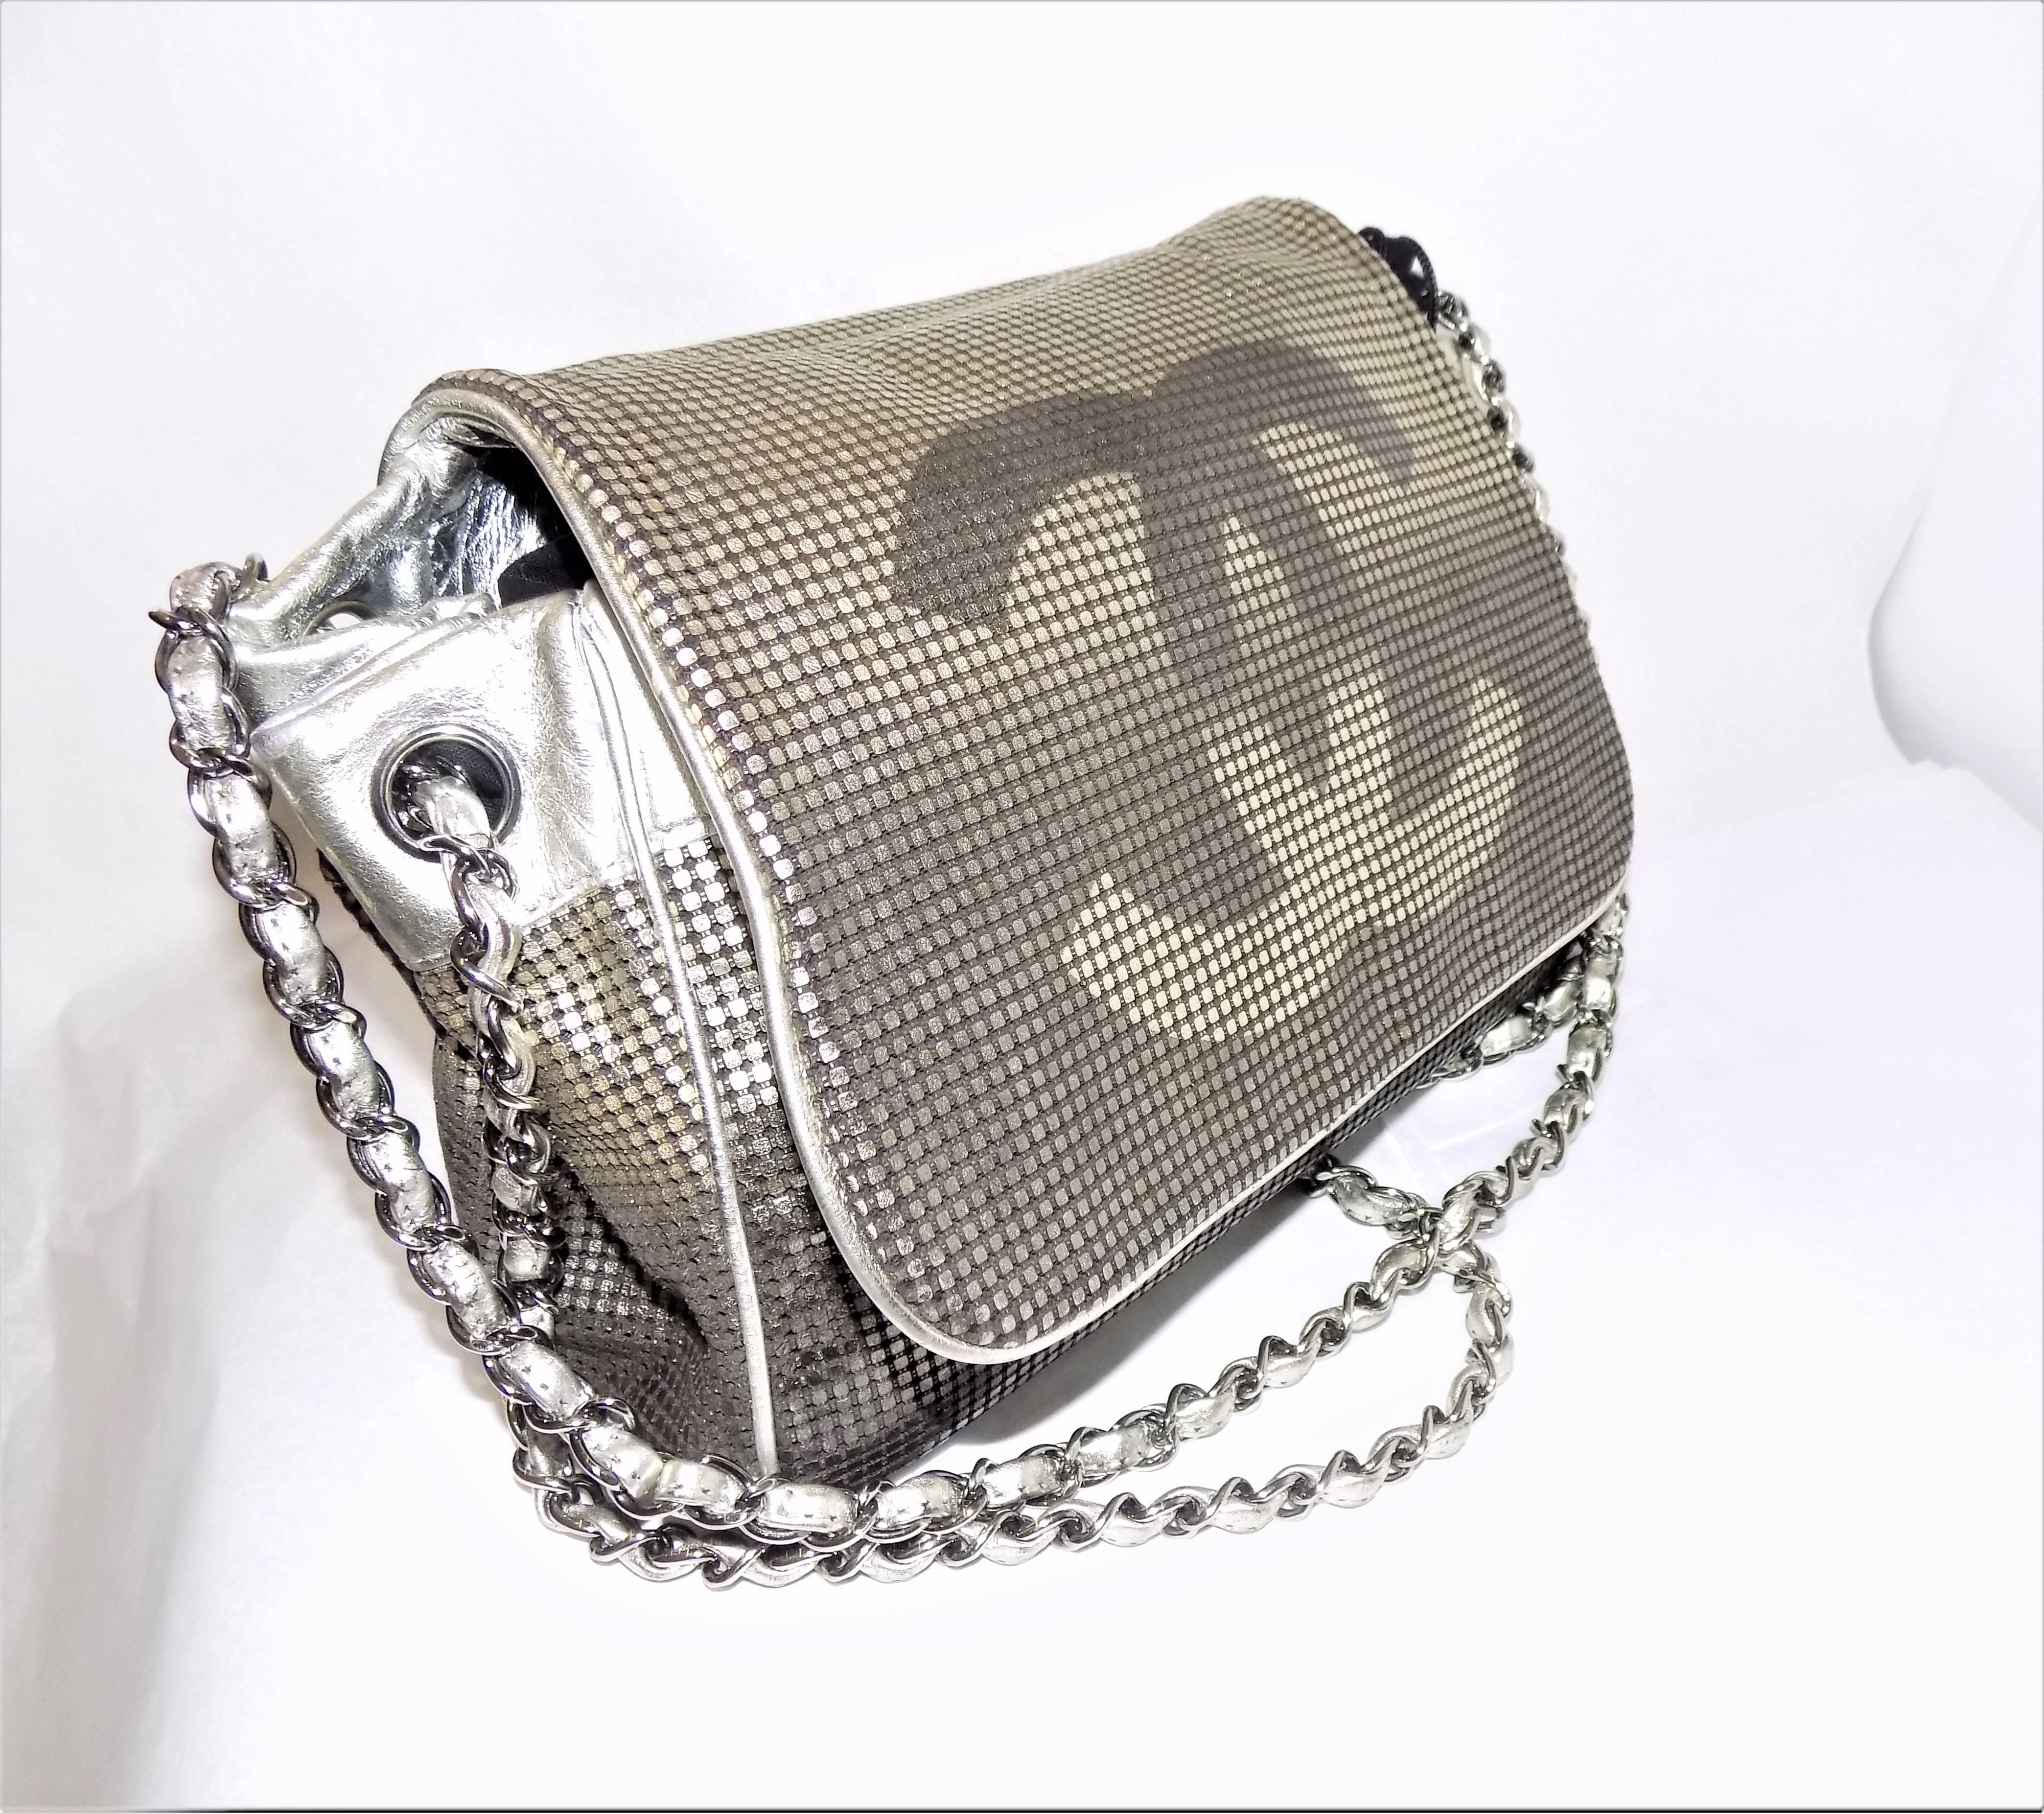 FABULOUS Chanel Hollywood CC Logo Silver Flap Purse Handbag 
Color: silver gradation  with silver hardware, 
100% Leather with large cc logo. Features Cell phone, Patch and Zip pockets
Length: 12